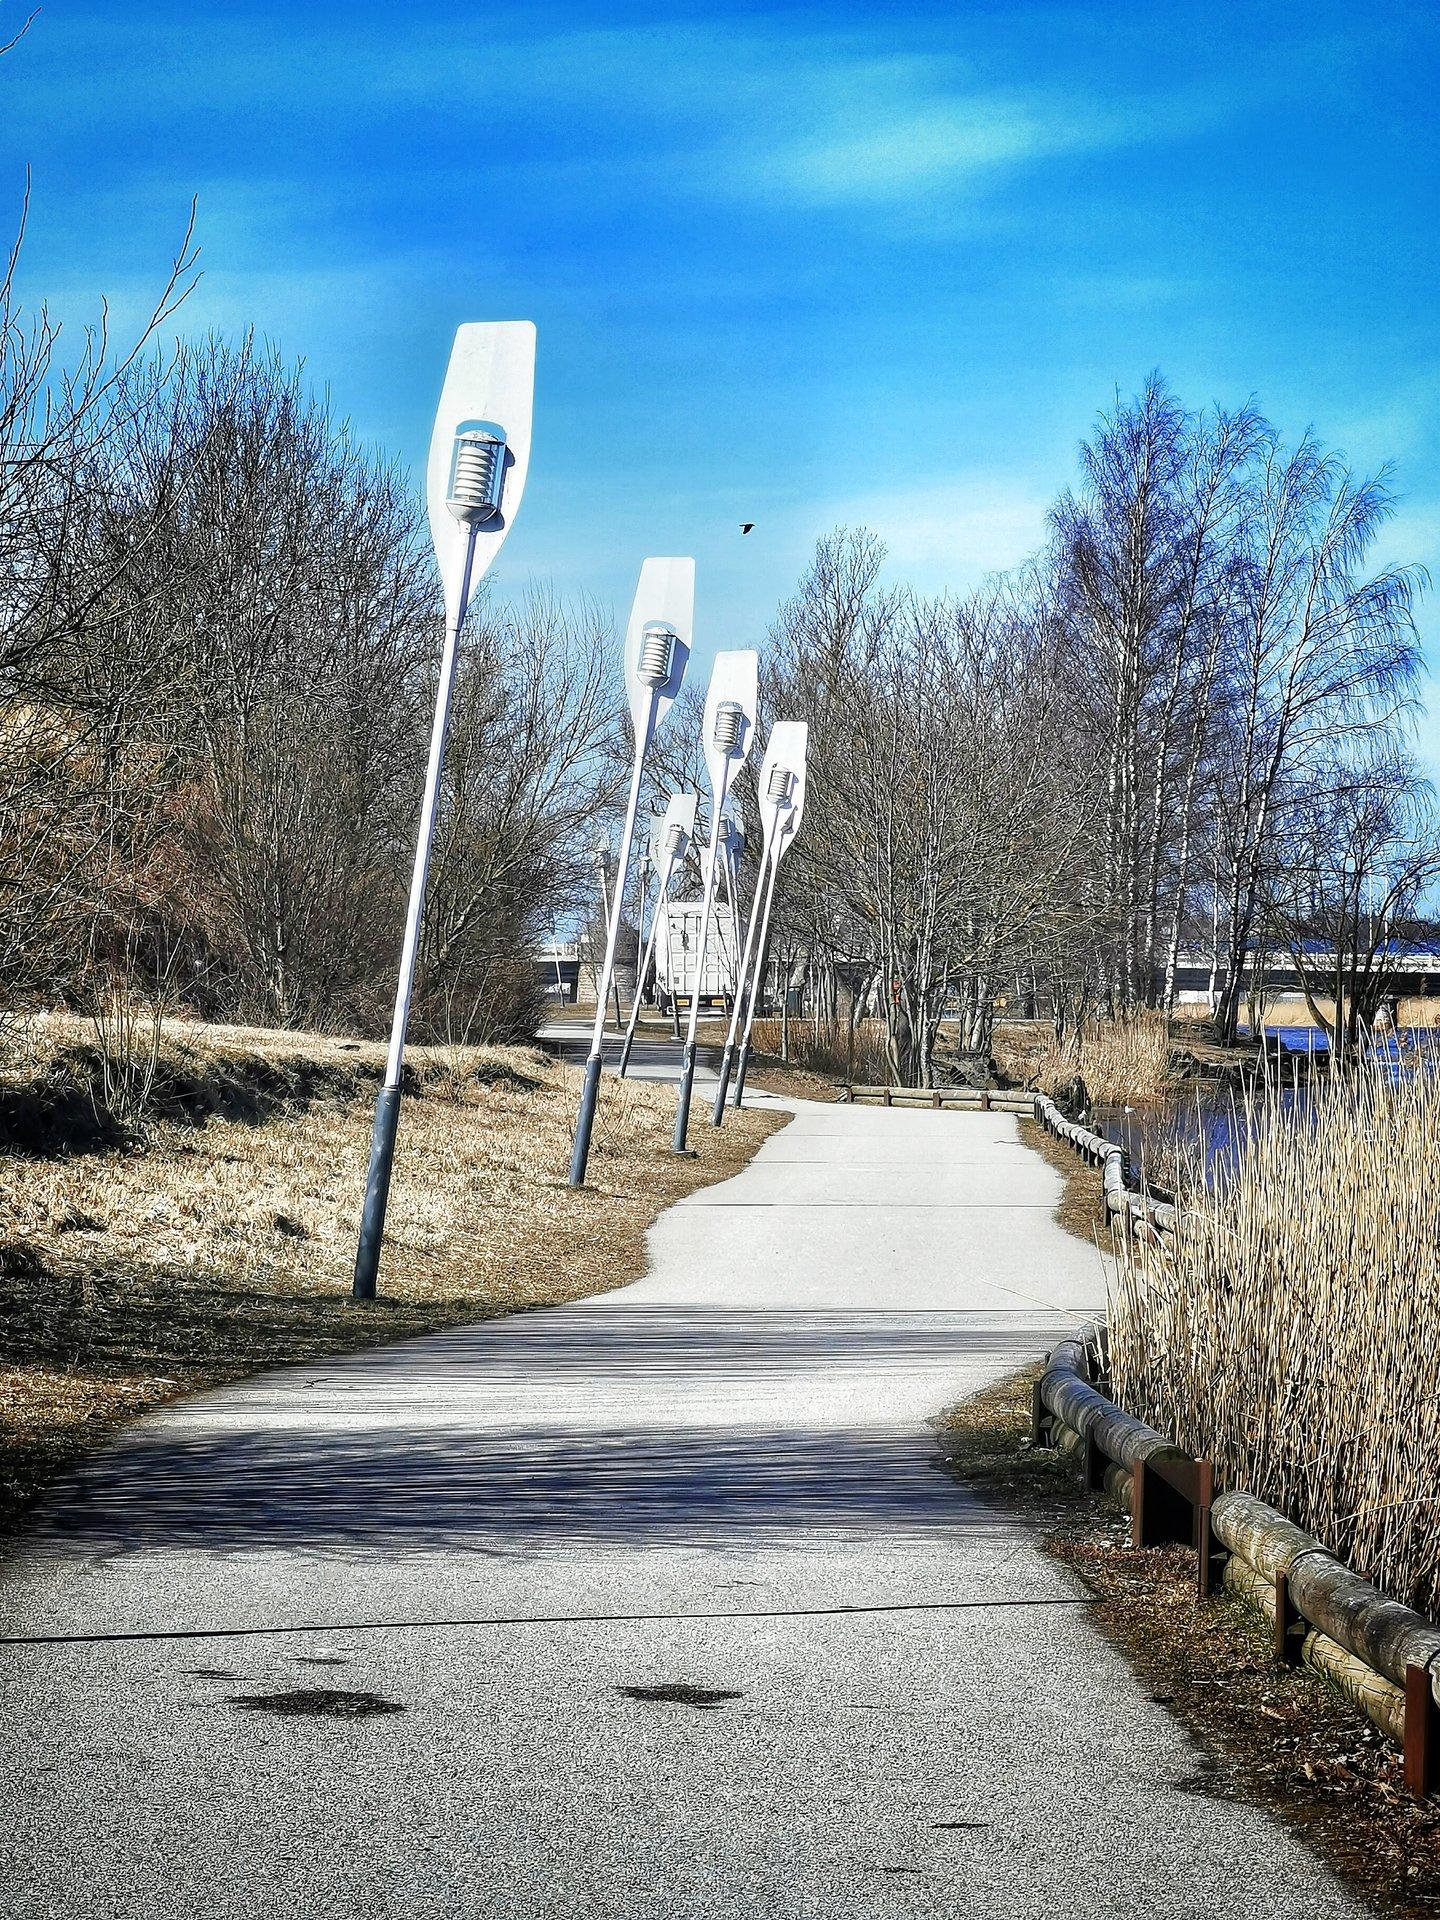 Health track on the left bank of the River Pärnu, or Jaanson’s Track